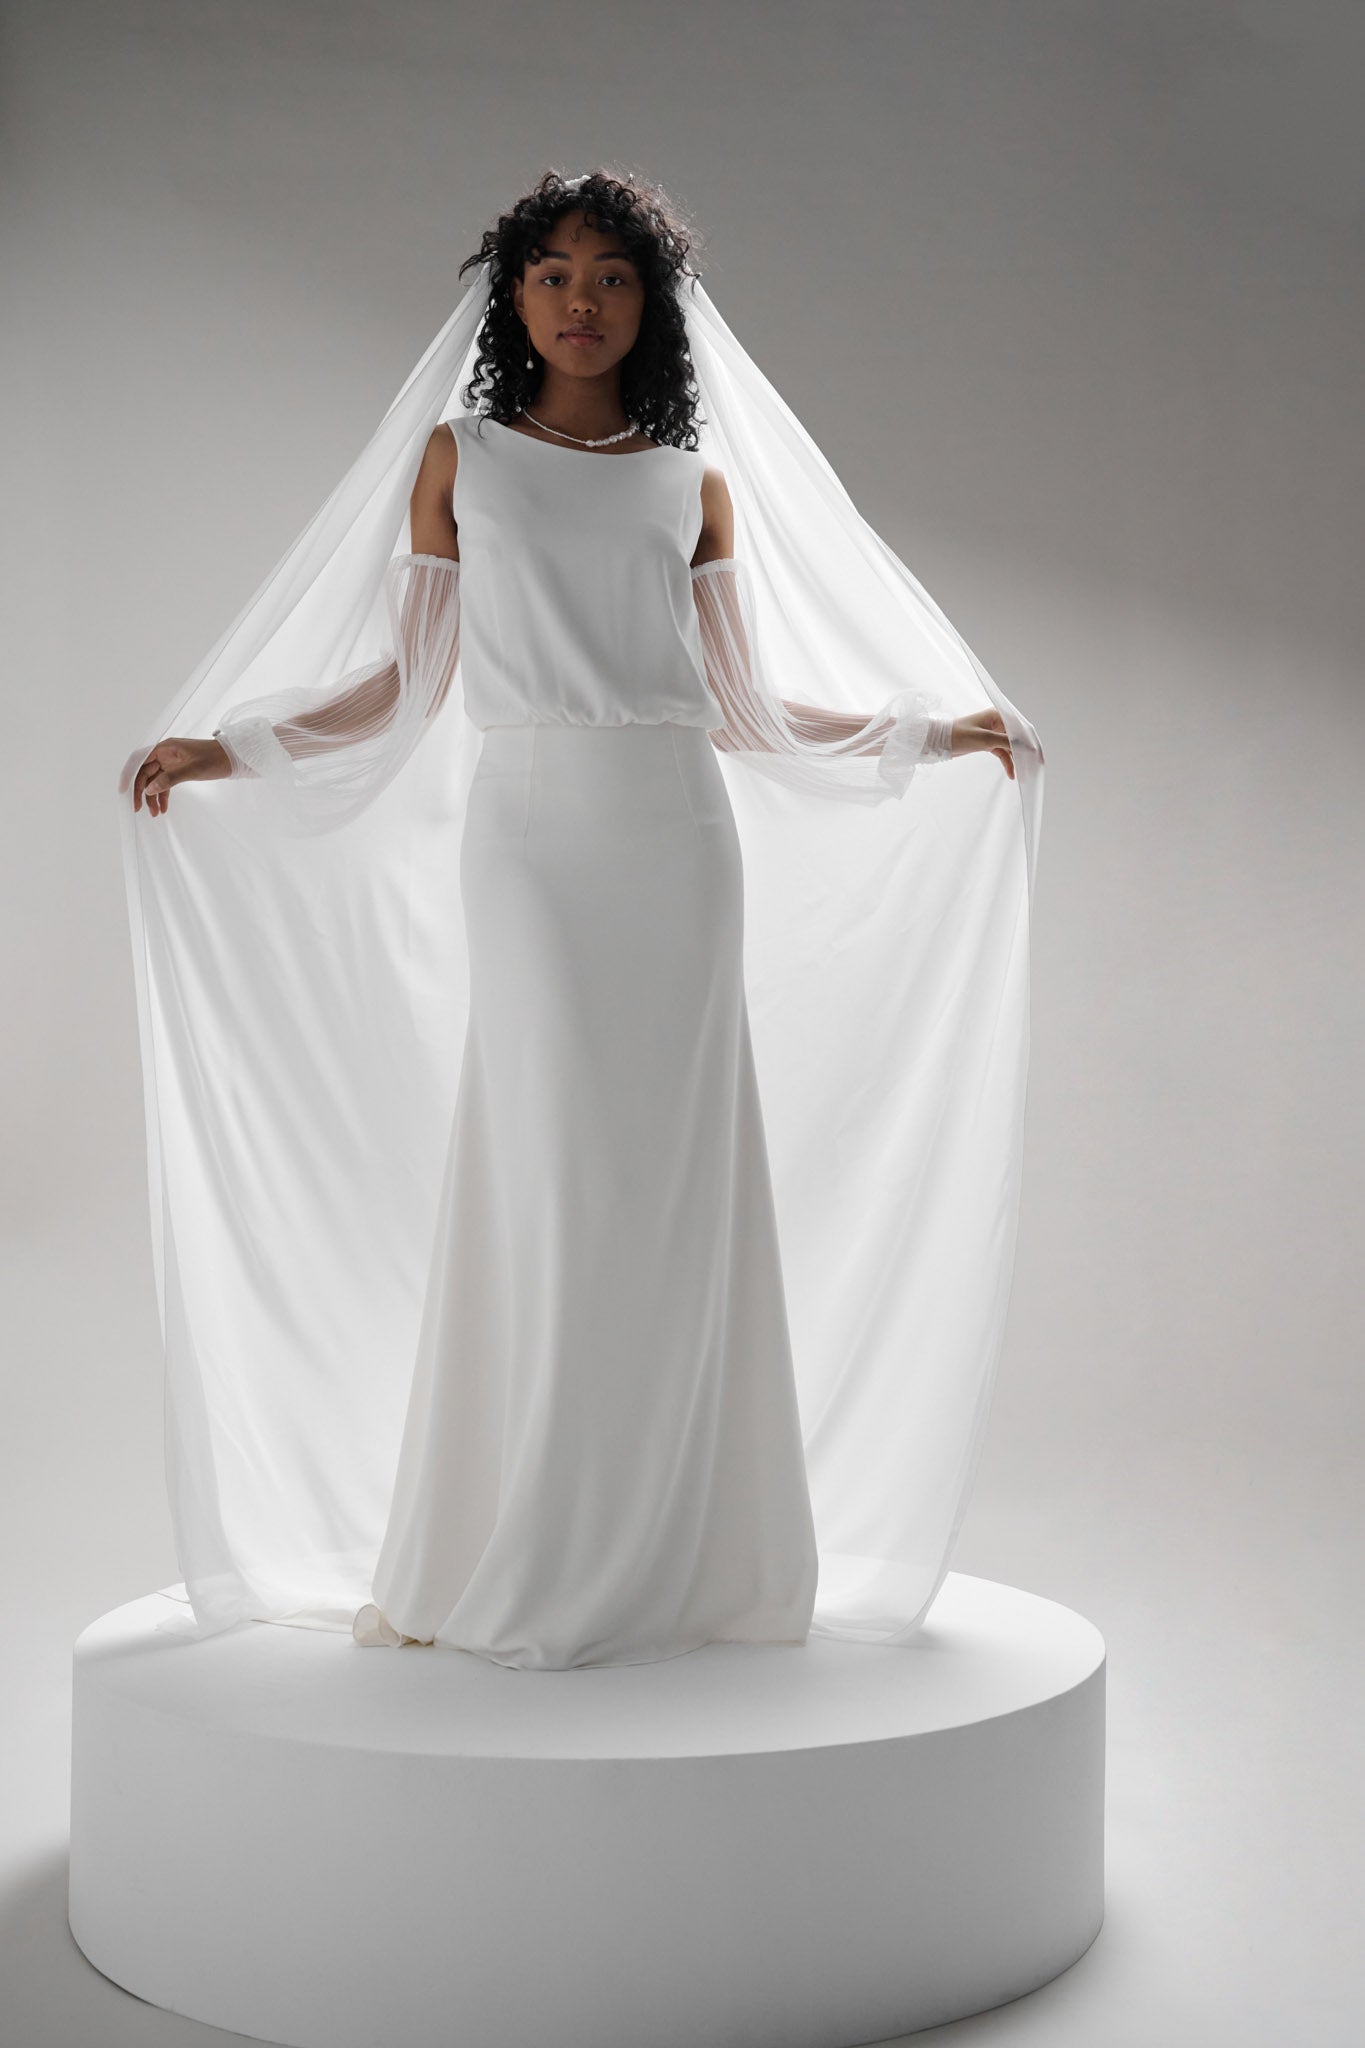 Classic chiffon veil which drapes around your shoulders as you walk down the aisle